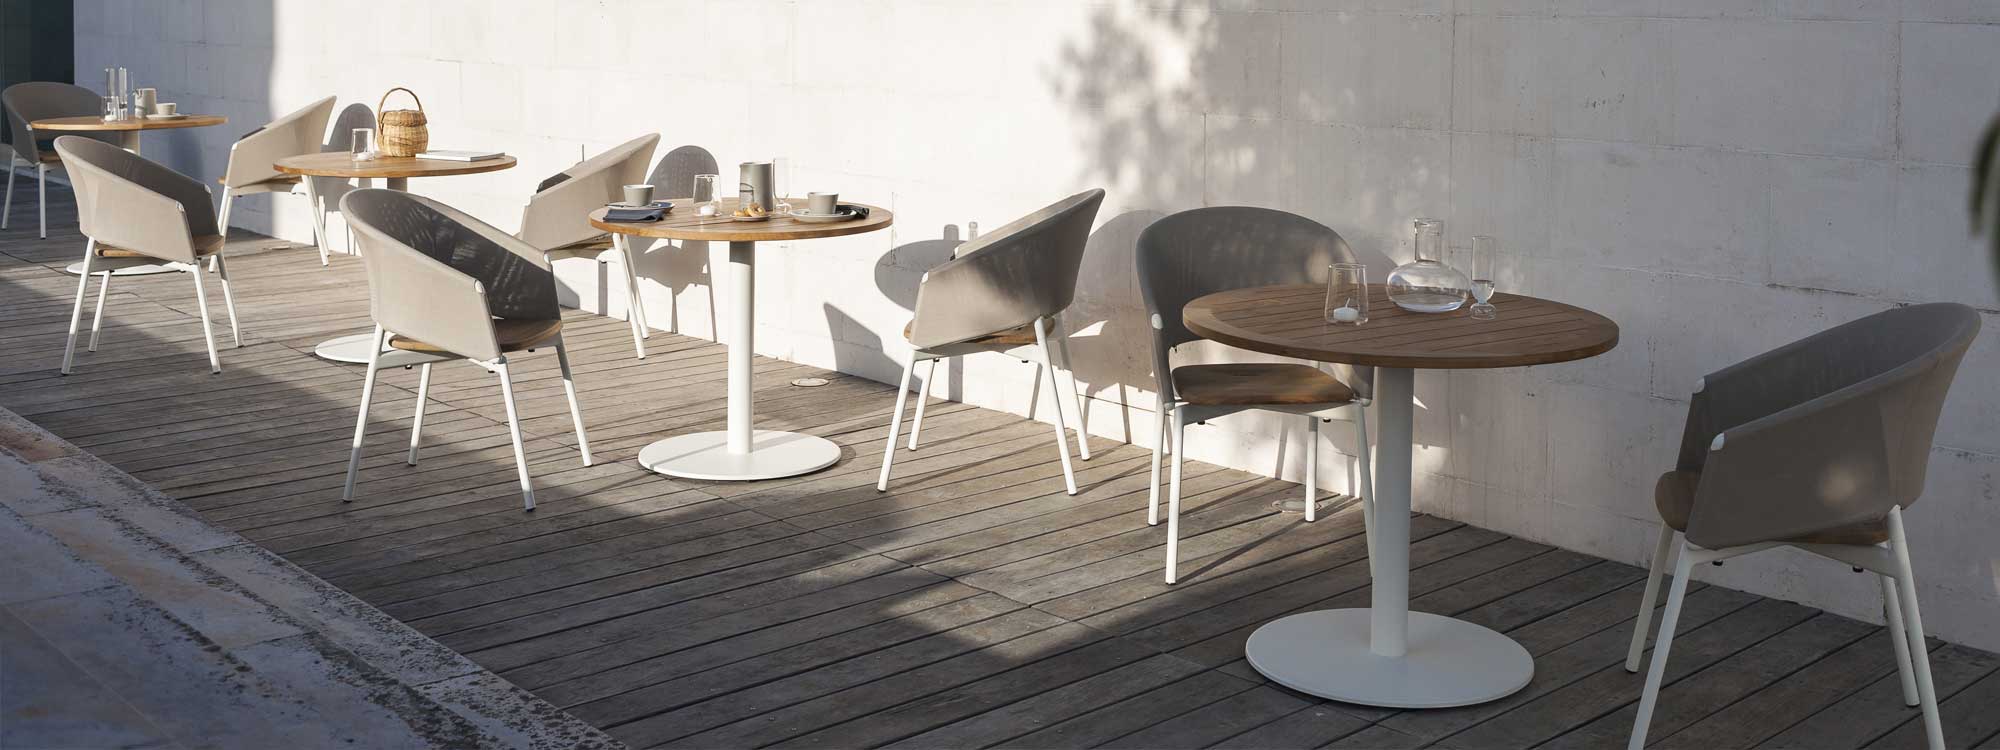 Image of decked outdoor terrace with RODA Stem white bistro tables with teak table tops and Piper Comfort garden chair in white and taupe